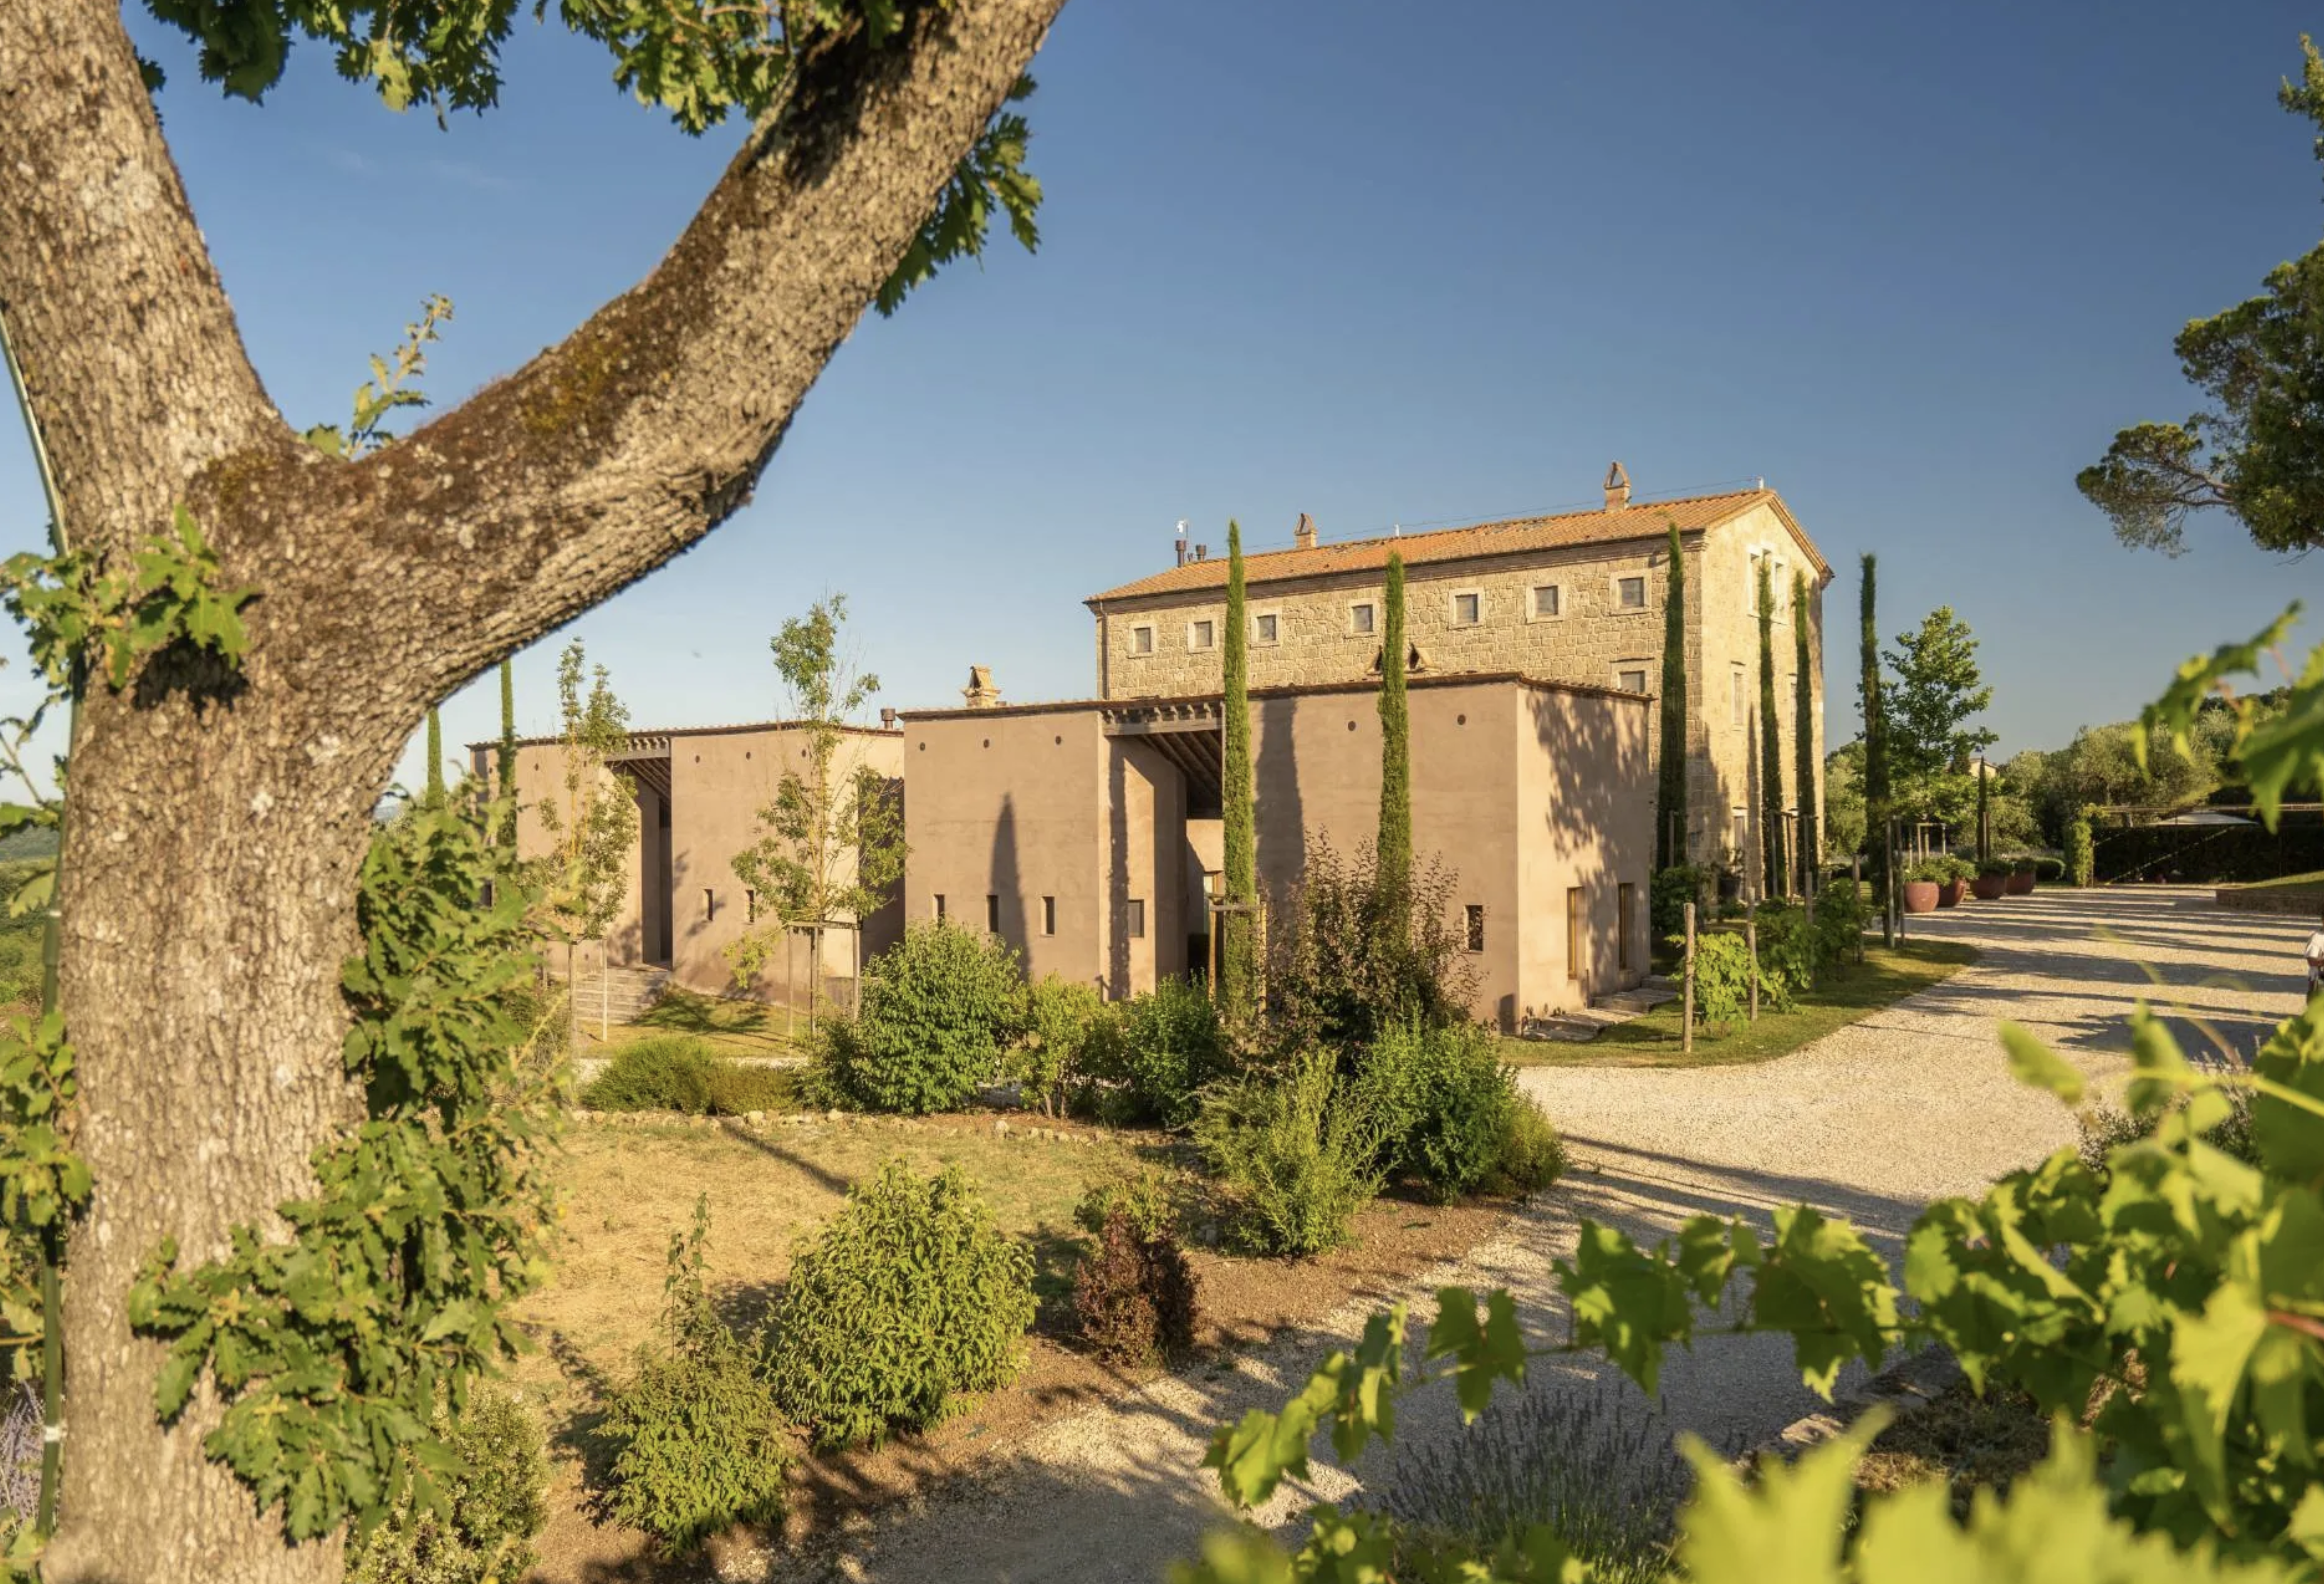 Francis York Villa Travertino: Luxury Villa and Wine Estate in the Heart of Tuscany 9.png